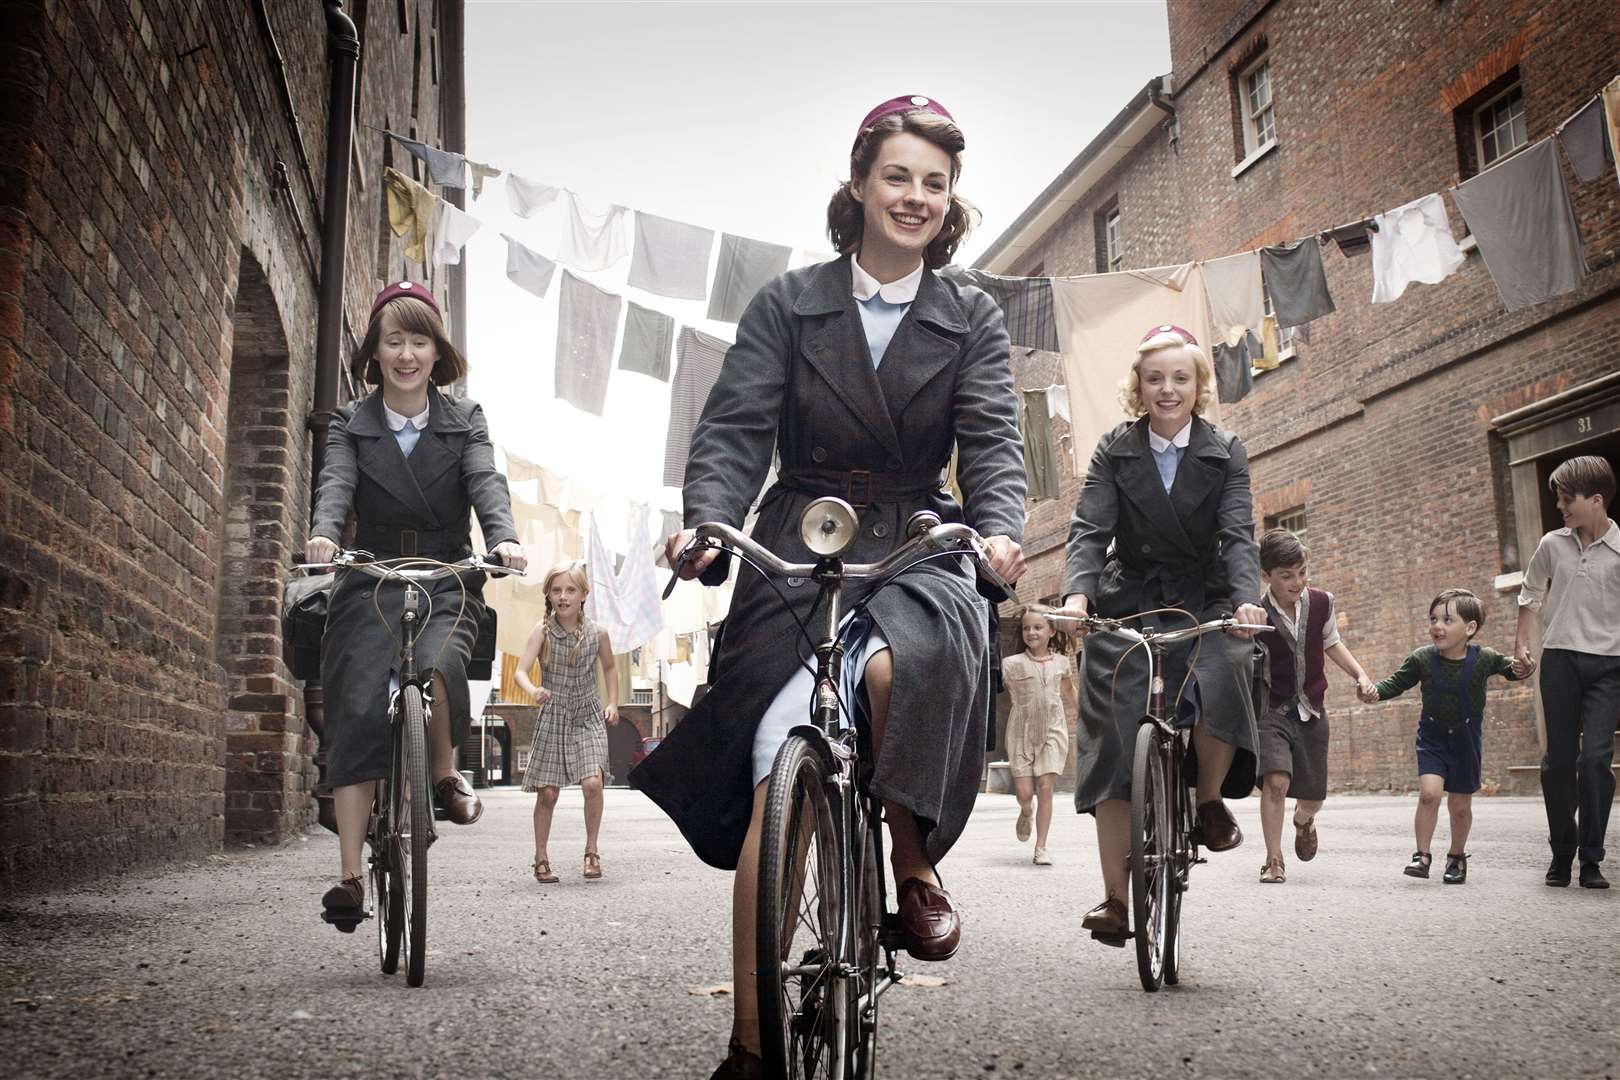 Call the Midwife was shot at Chatham's Historic Dockyard. Picture: Laurence Cendrowicz